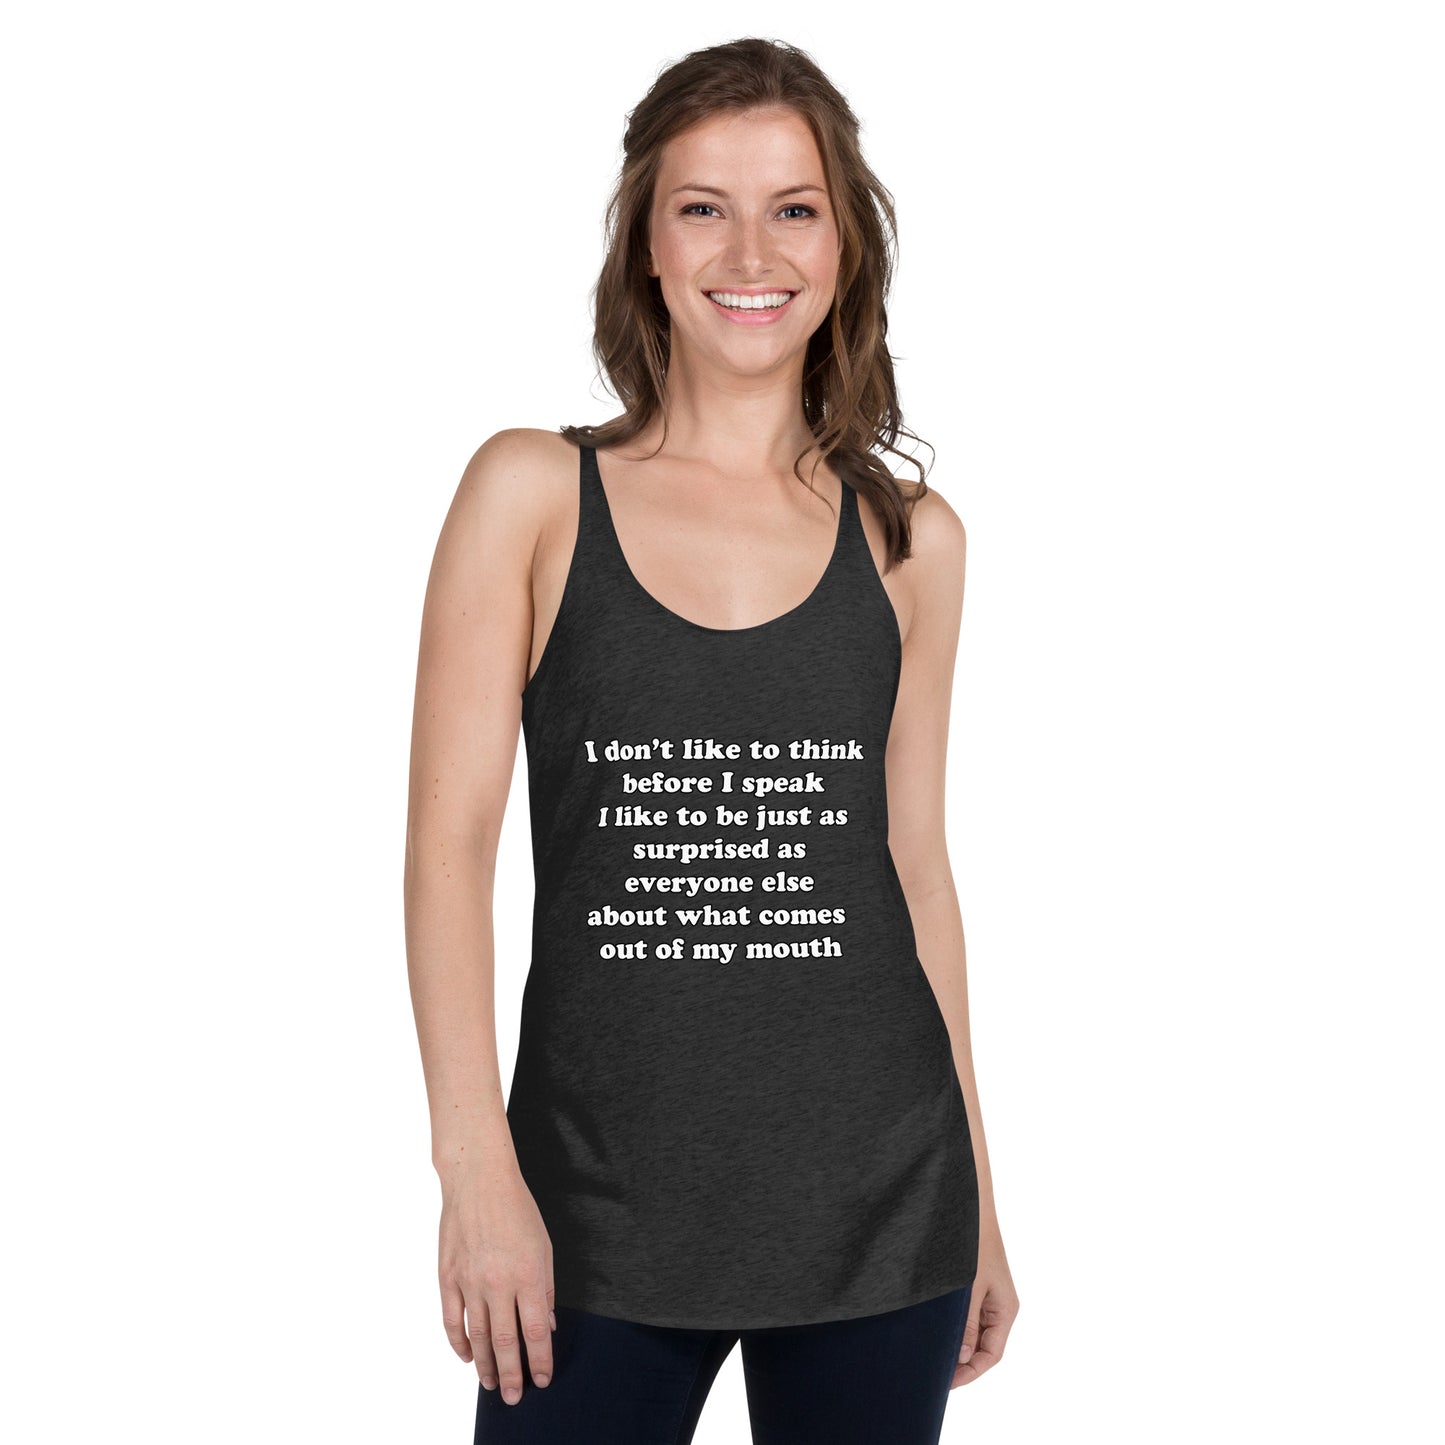 Woman with black tank top with text “I don't think before I speak Just as serprised as everyone about what comes out of my mouth"